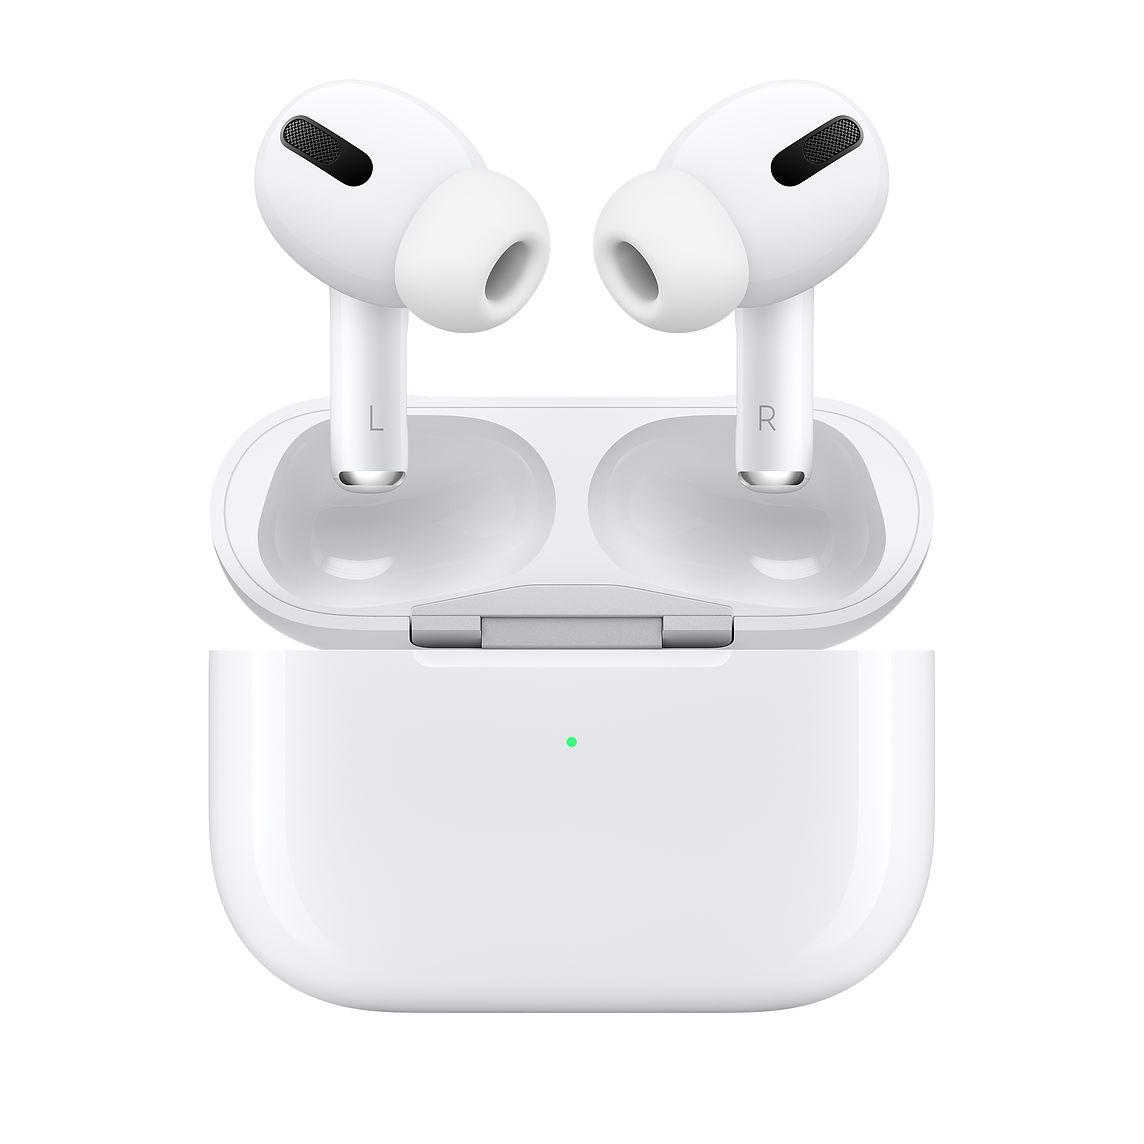 Save $30 on Apple AirPods Pro – just $219.99